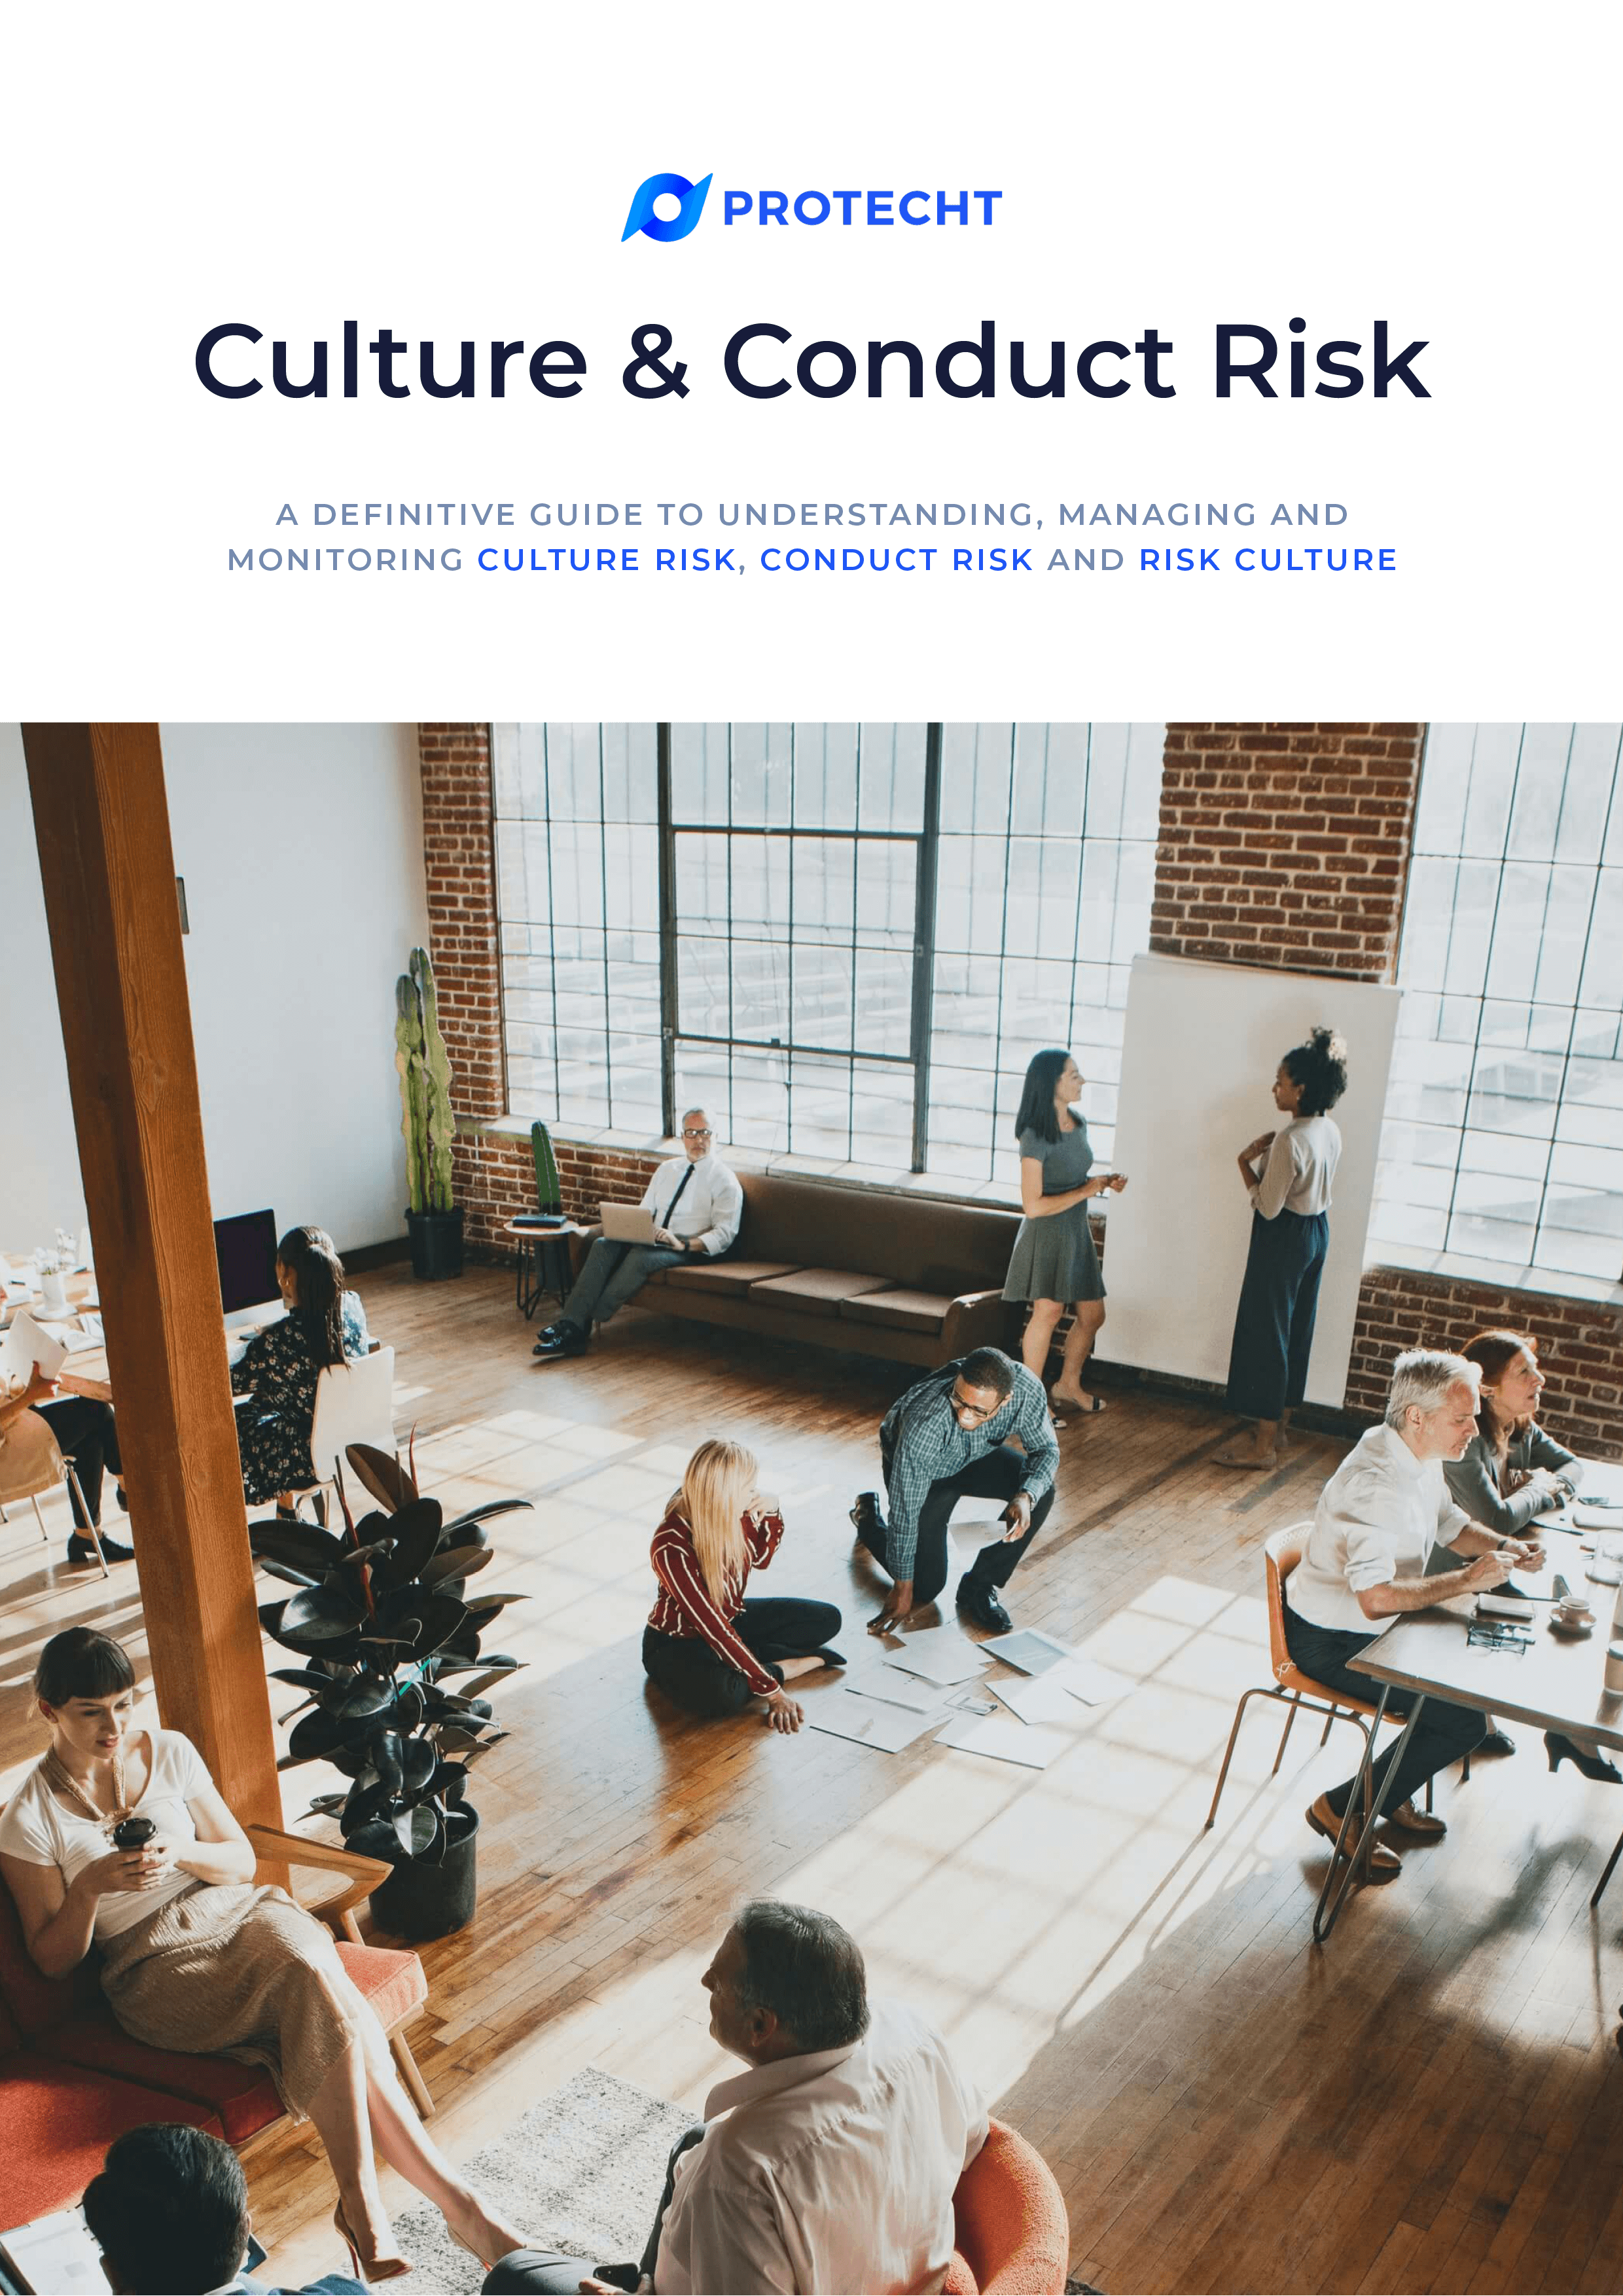 A Definitive Guide to Culture Risk, Conduct Risk, and Risk Culture